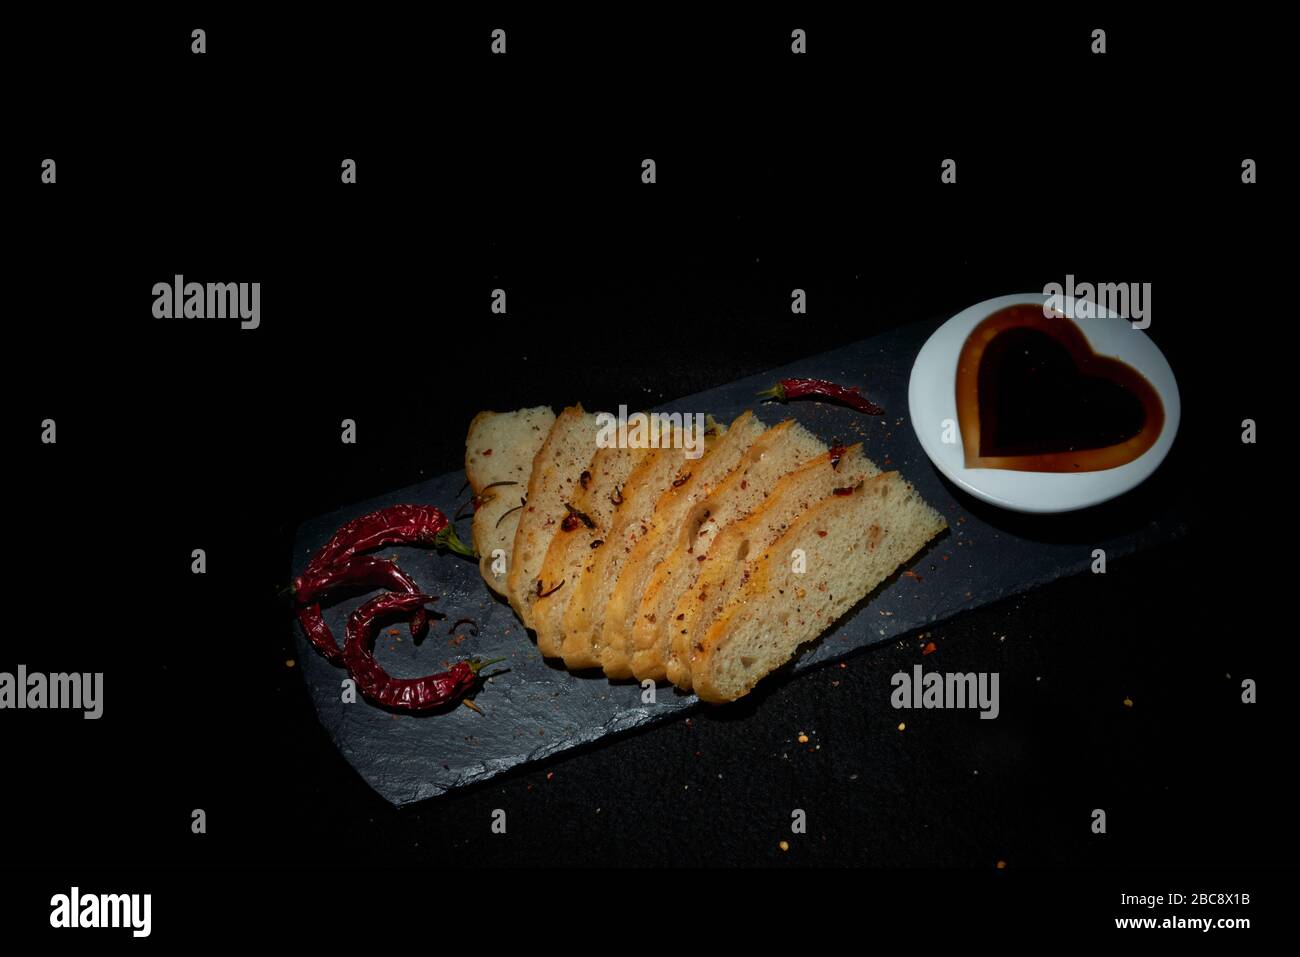 Display of homemade Italian style Focaccia bread with red chillies.  Sliced bread on black slate with balsamic vinegar in heart shape dish a Stock Photo